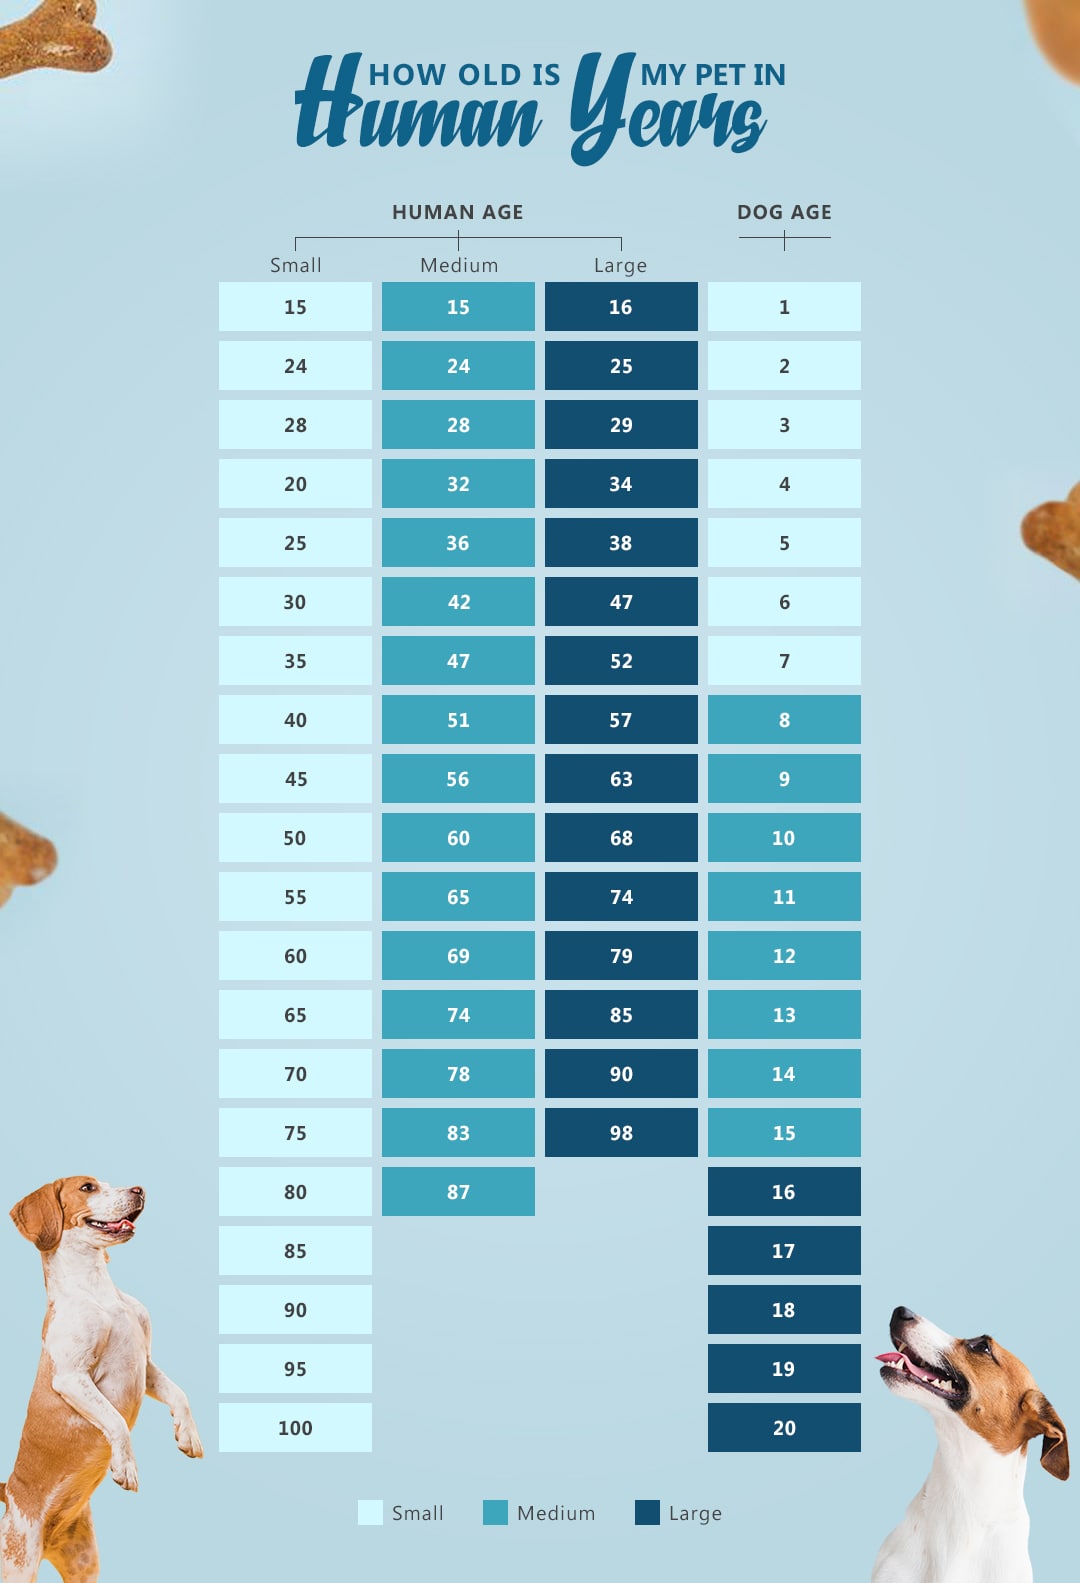 how old is dog in dog years